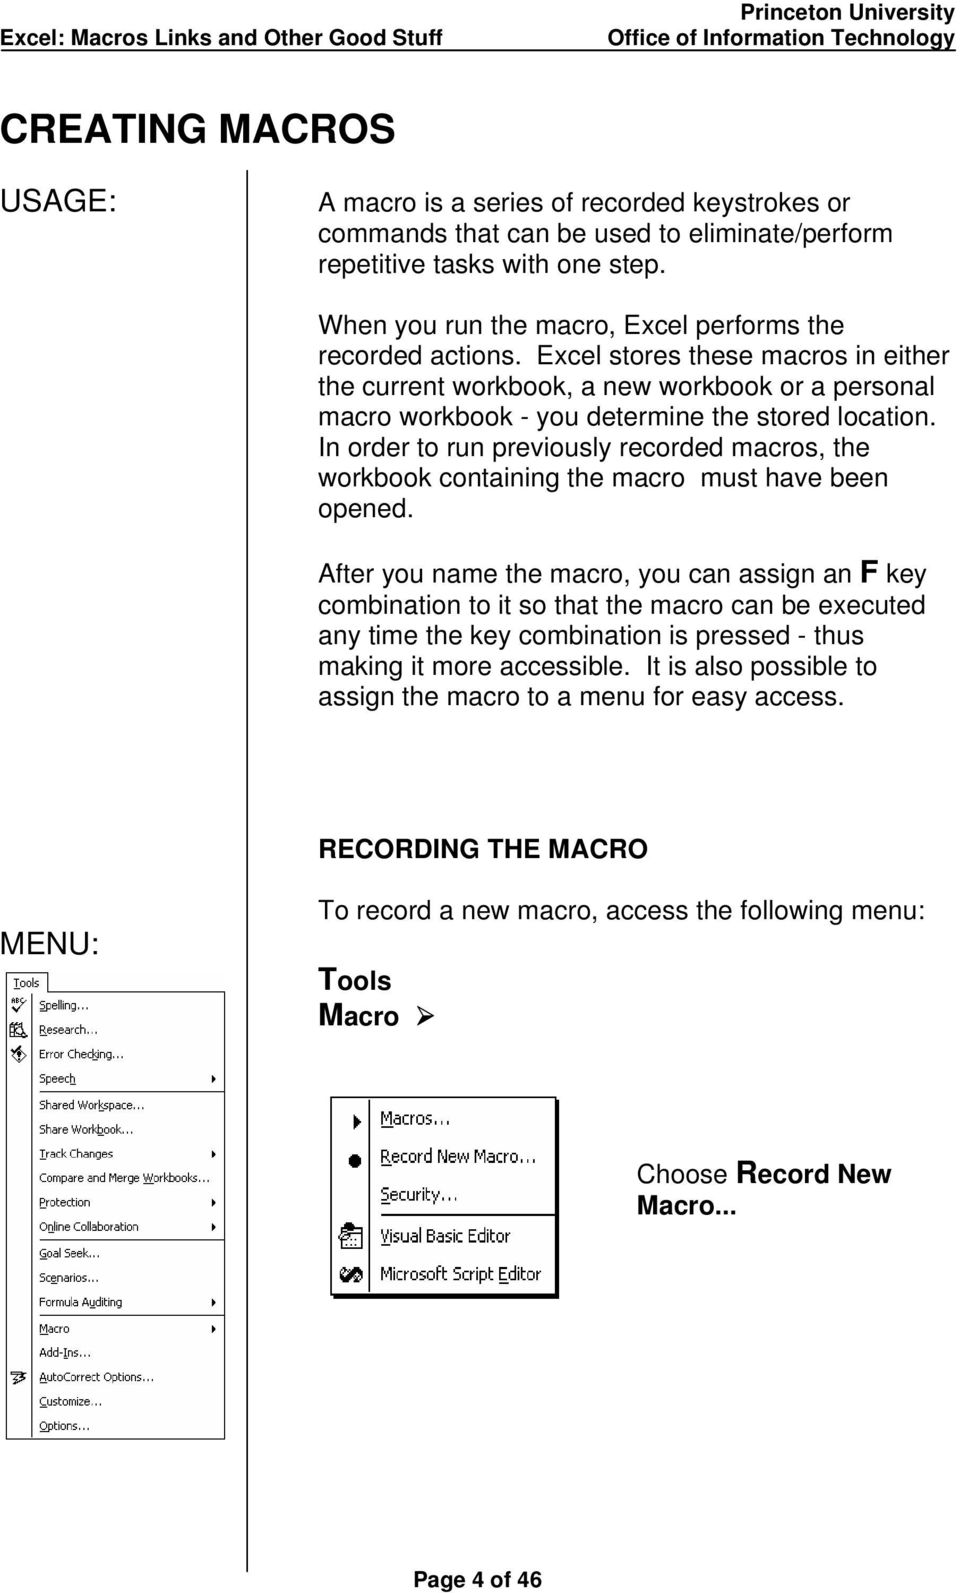 In order to run previously recorded macros, the workbook containing the macro must have been opened.